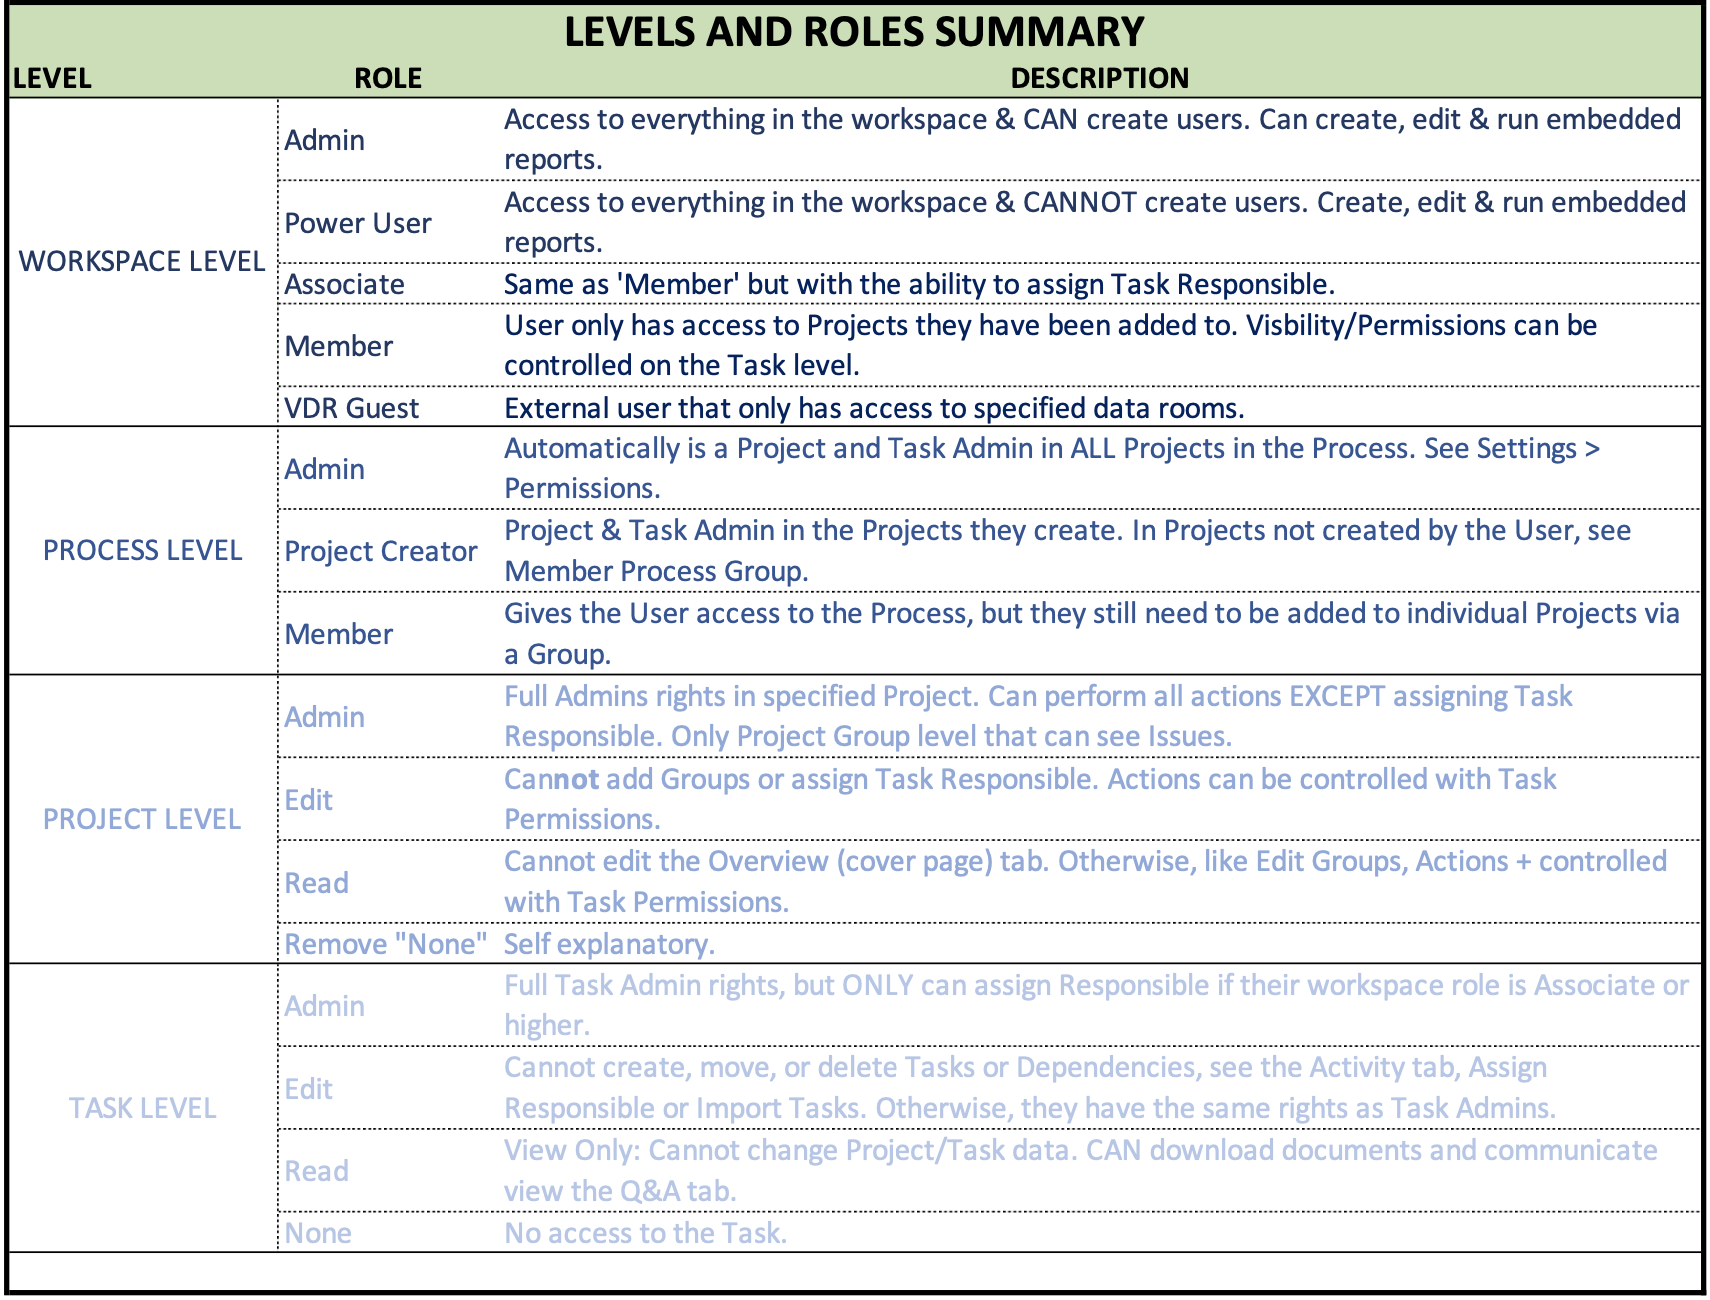 levels_and_roles_summary.png